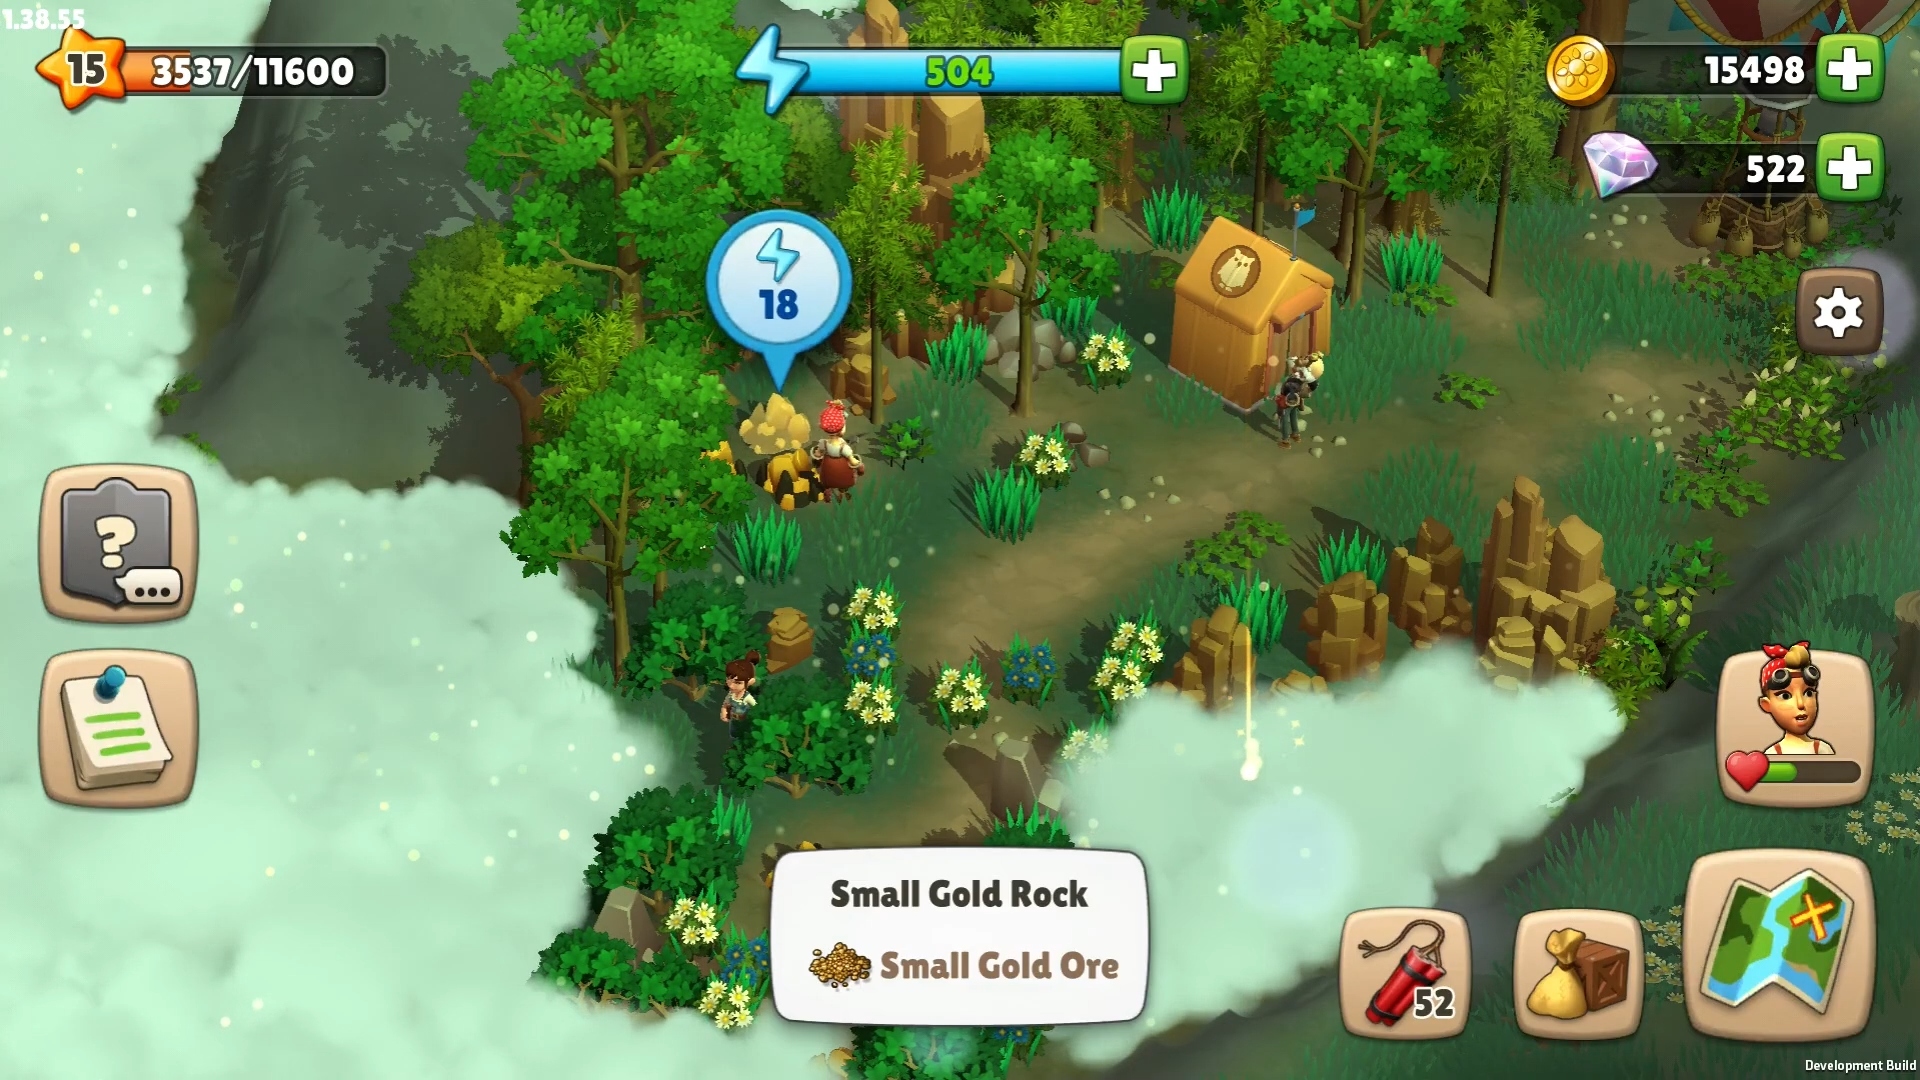 Life games: Sunrise Village. Image shows characters gathering resources in a field. Image shows 